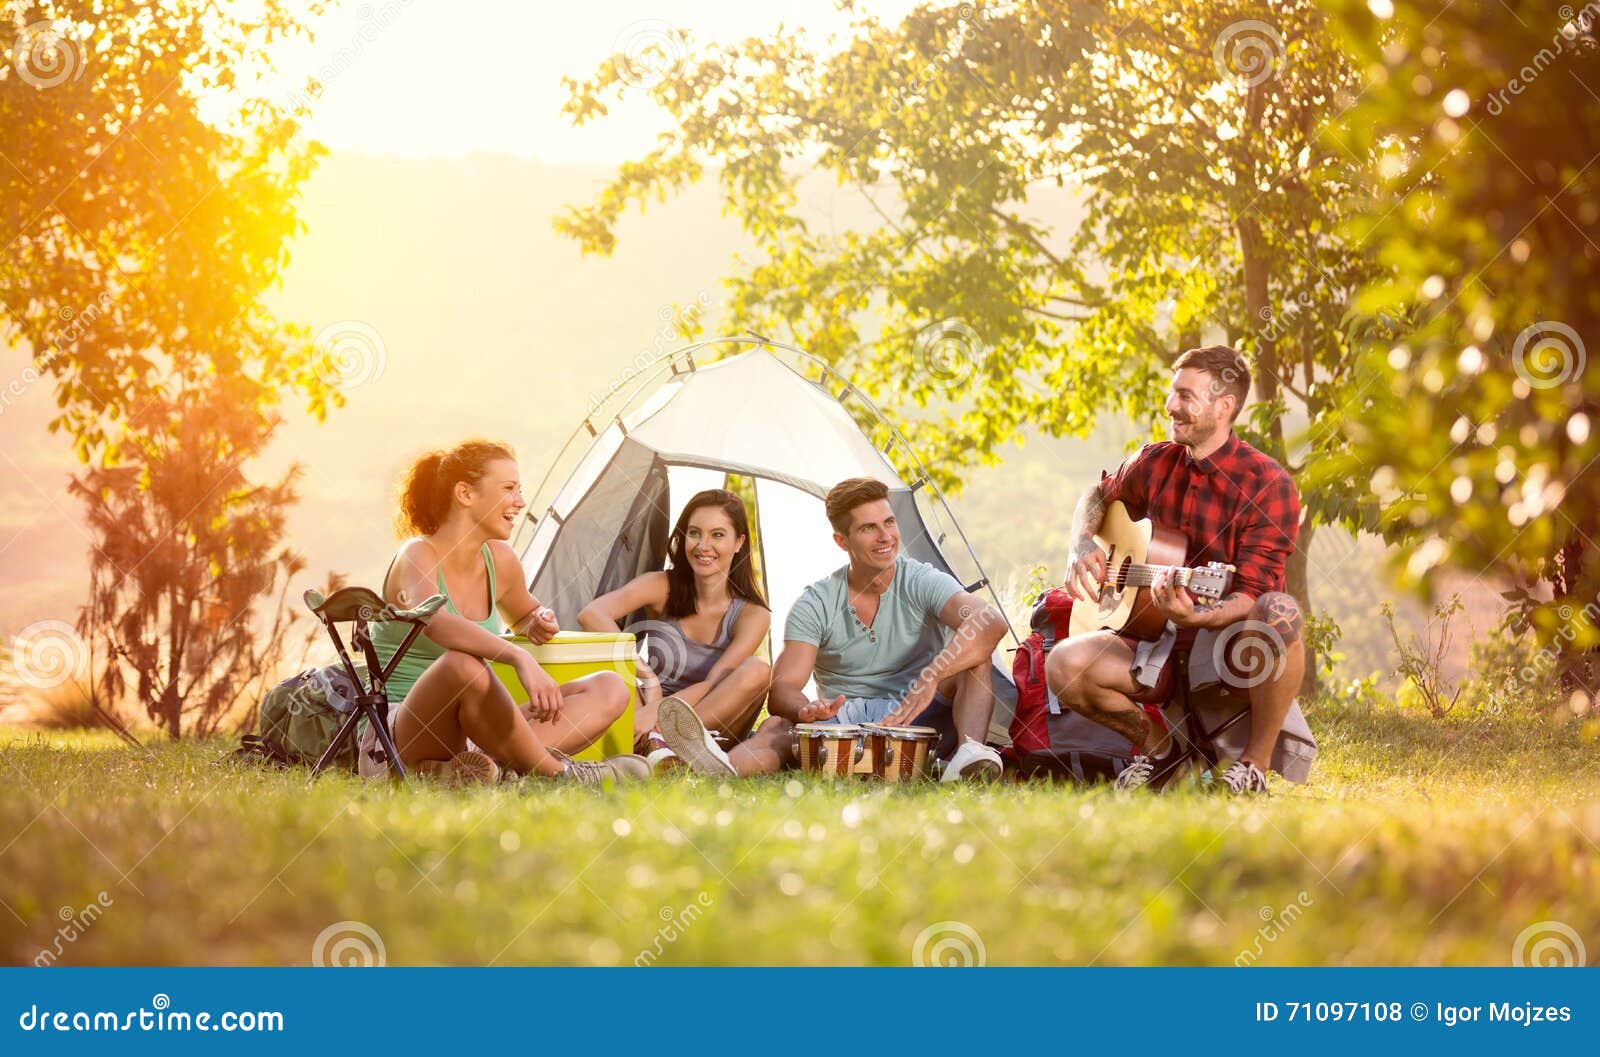 young friends have good time on camping trip